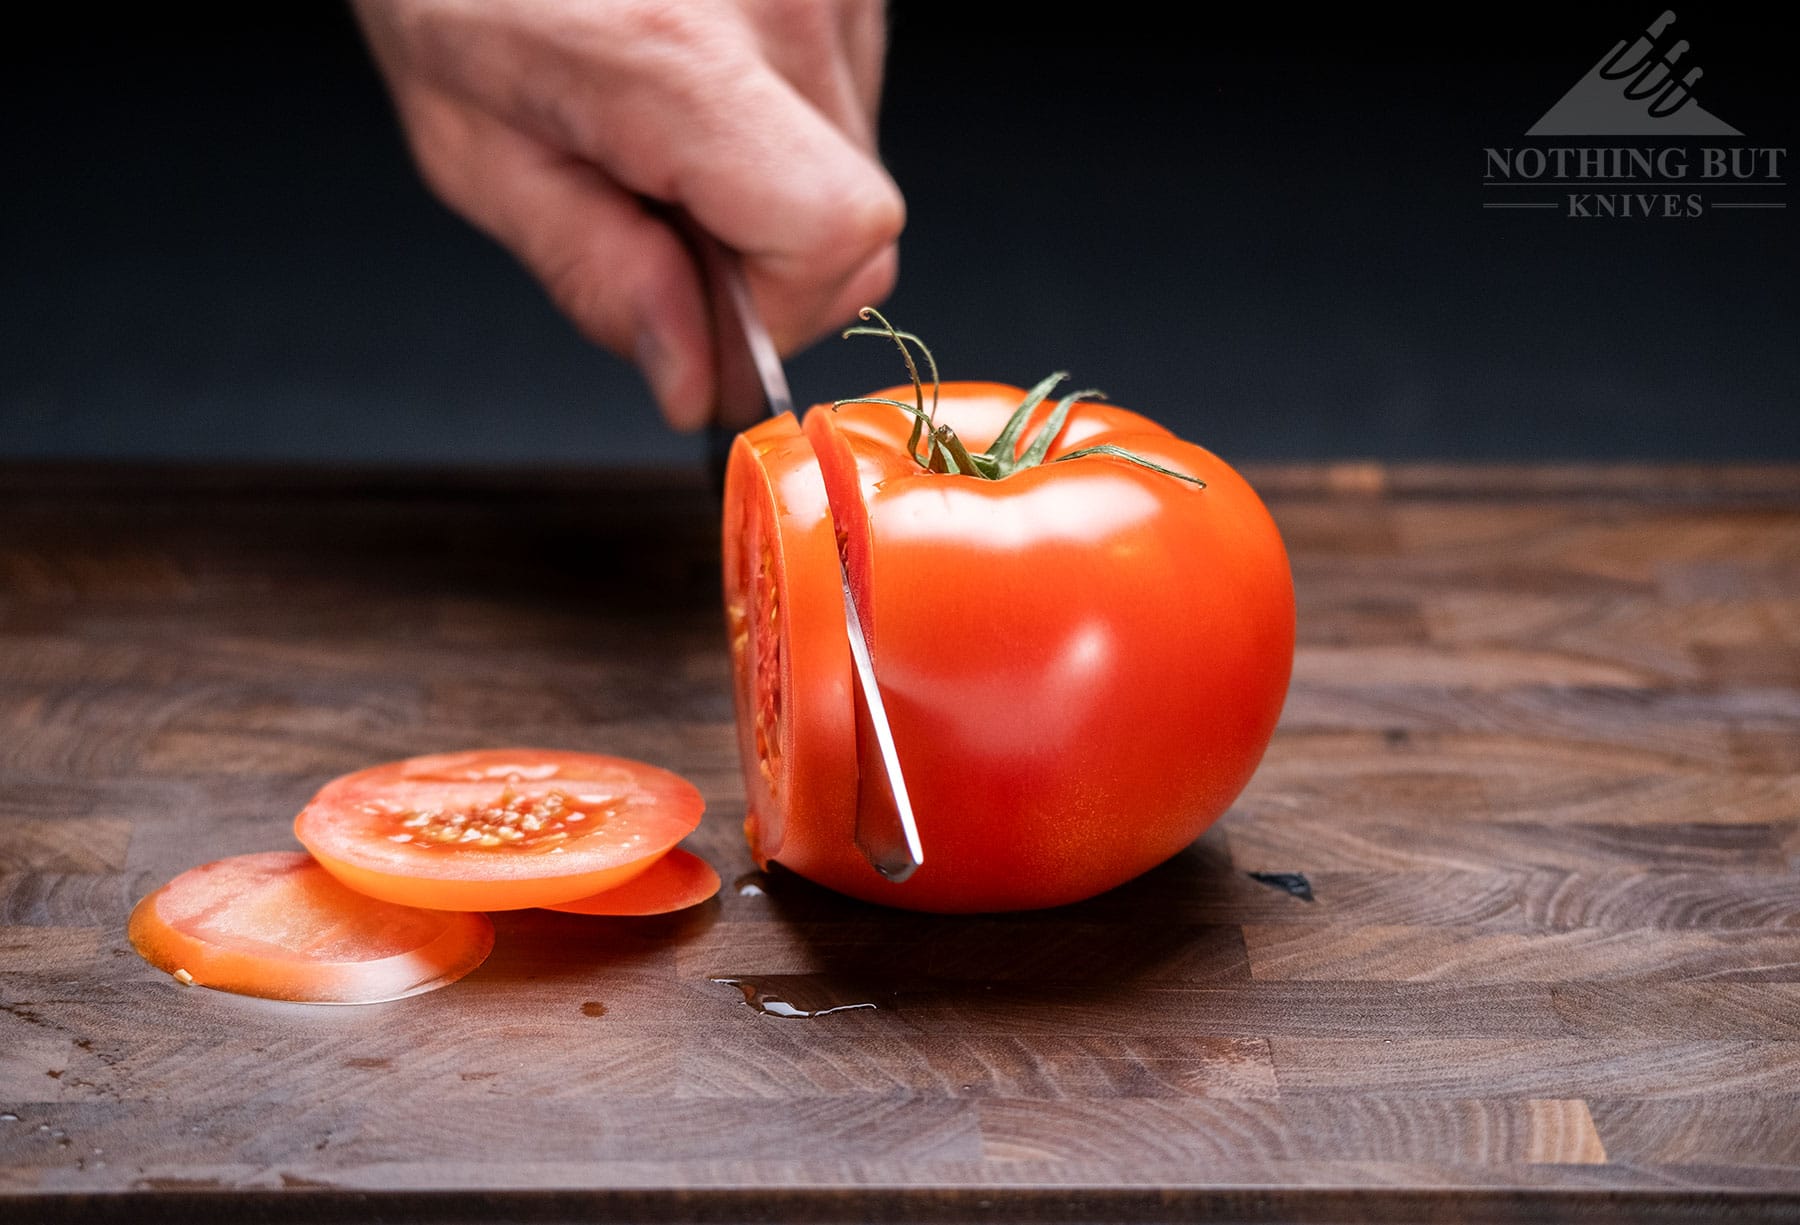 The Cangshan TC chef knife being used to slice a tomato with the point of the knife facing the camera.